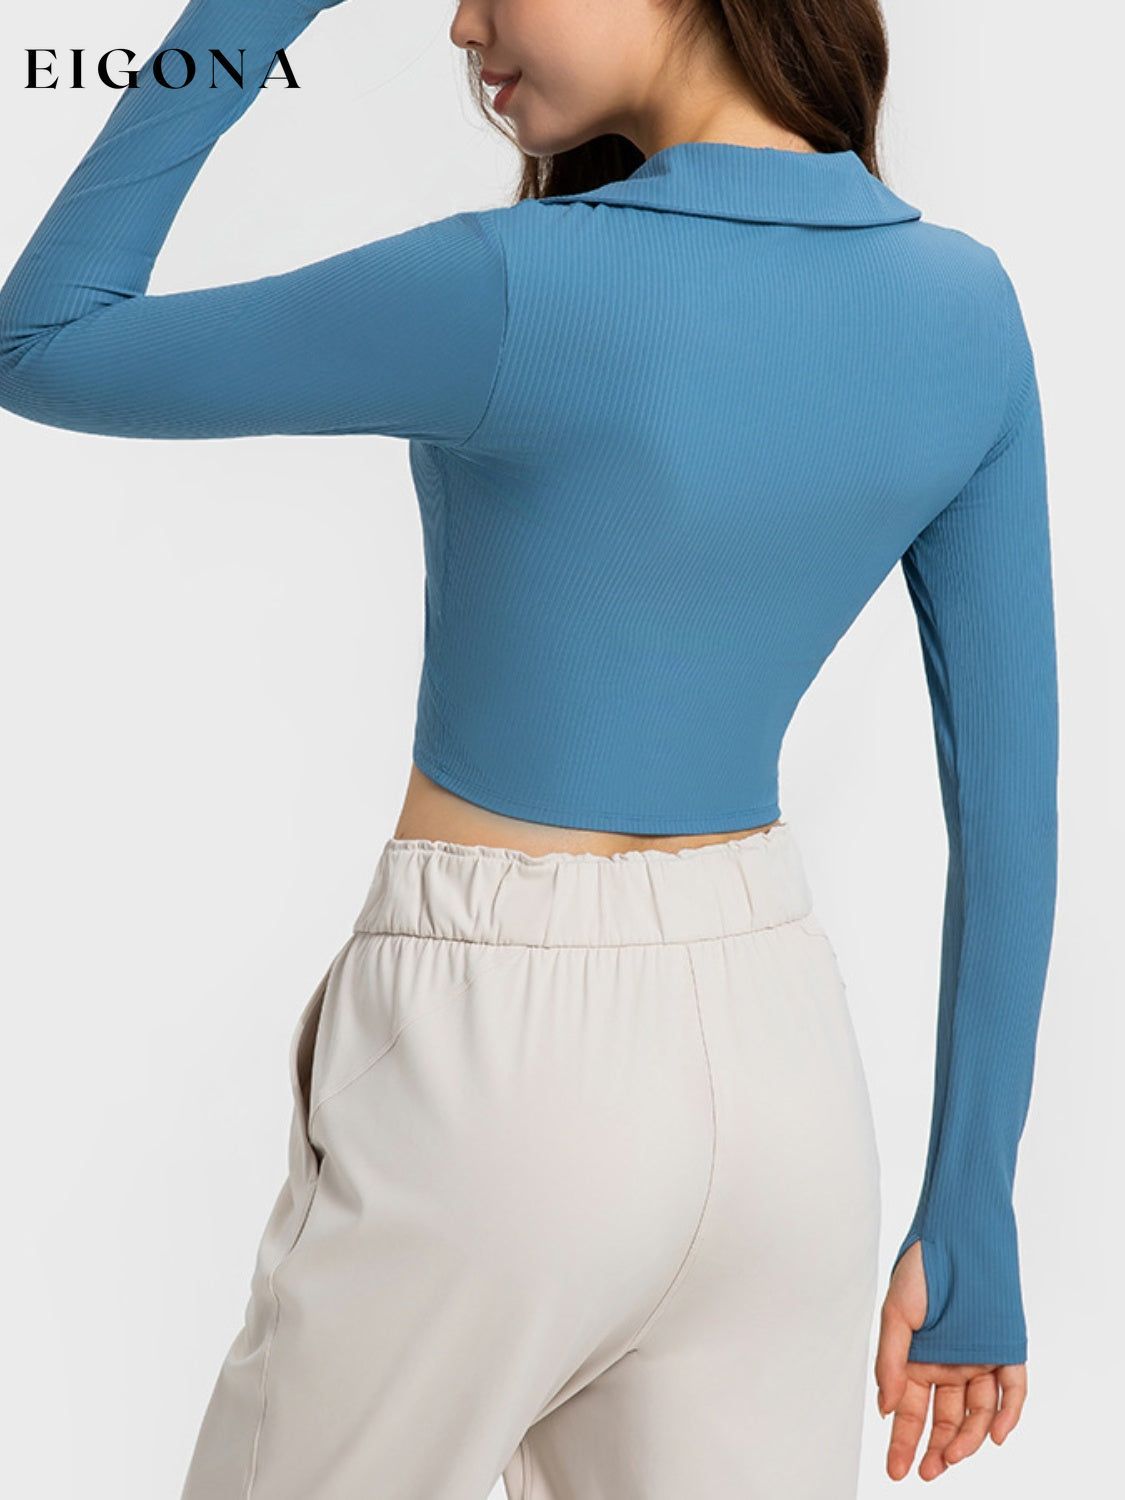 Long Sleeve Sports Top activewear C-Thousand clothes Ship From Overseas